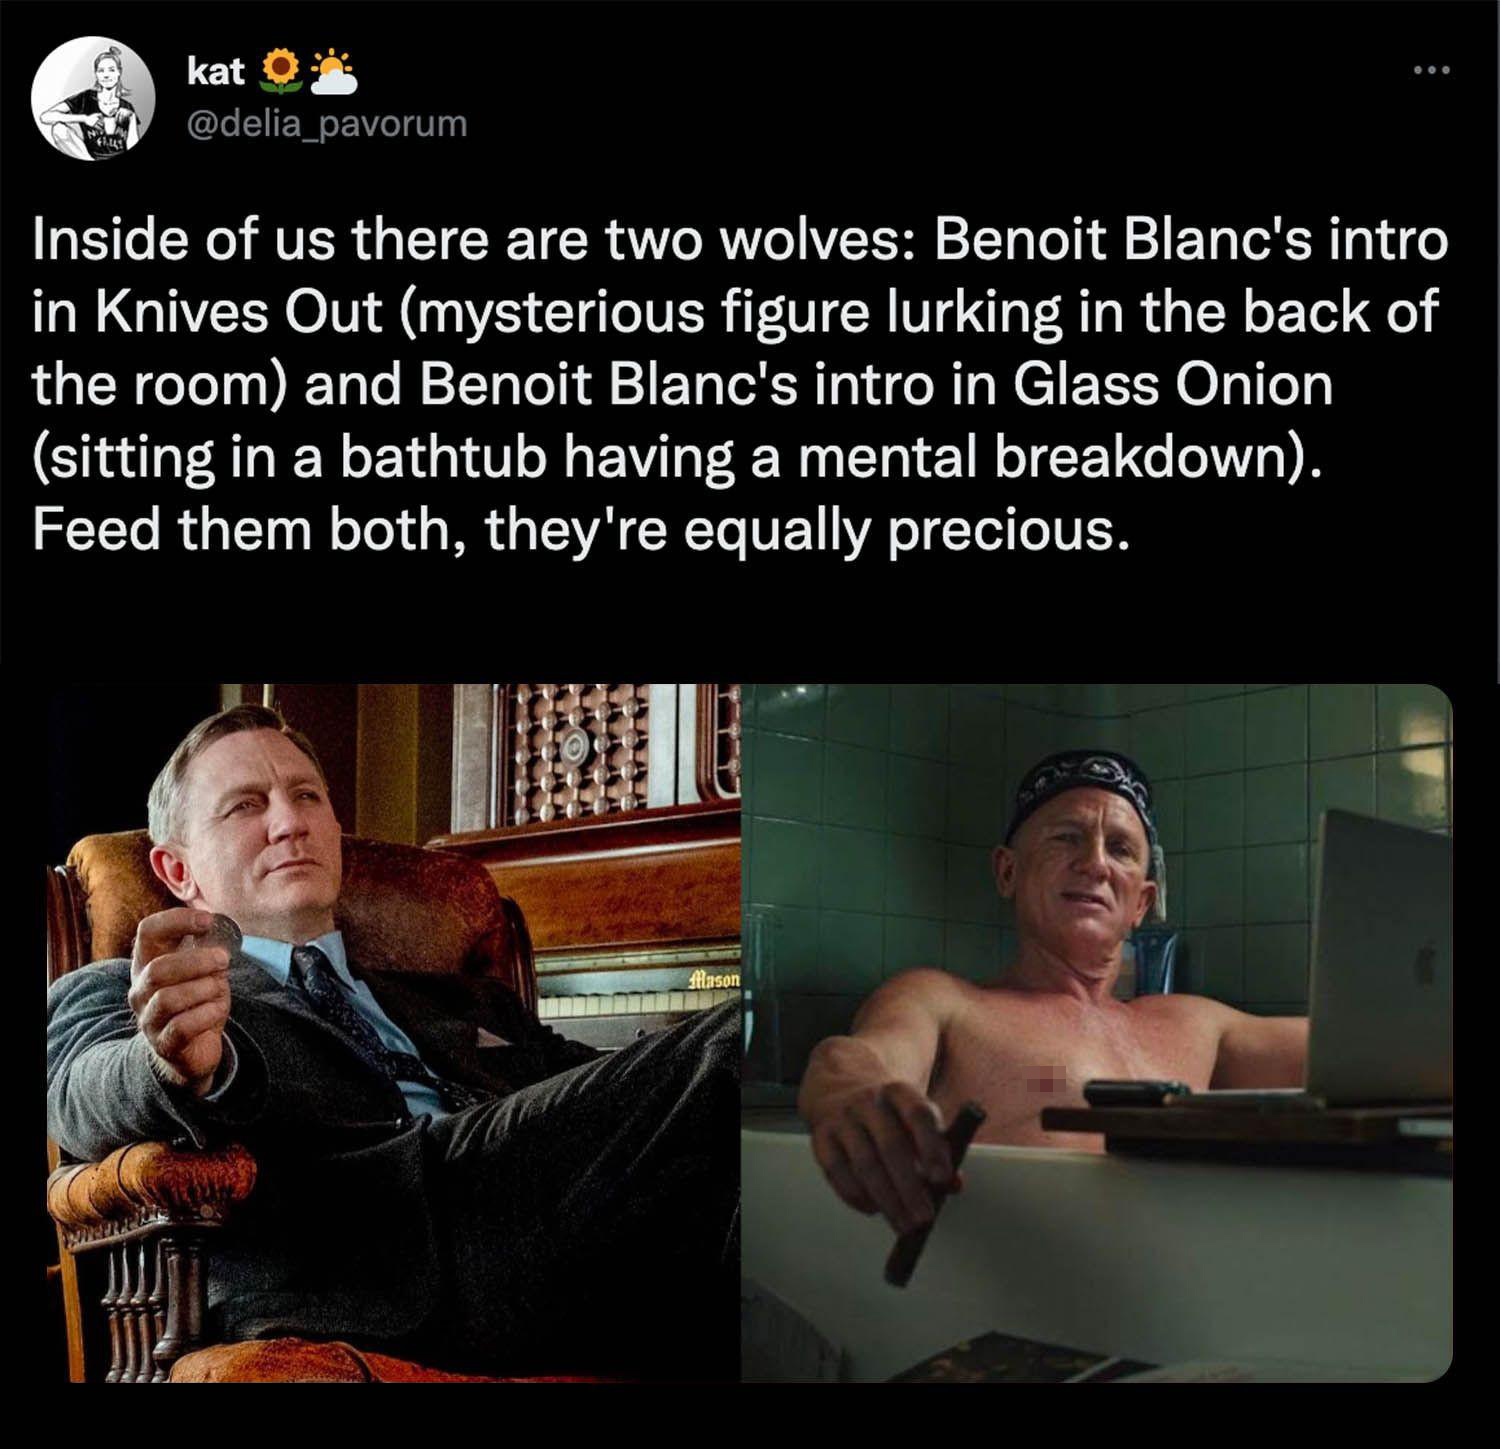 dank memes - - Inside of us there are two wolves Benoit Blanc's intro in Knives Out mysterious figure lurking in the back of the room and Benoit Blanc's intro in Glass Onion sitting in a bathtub having a mental breakdown. Feed them both, they're equally p